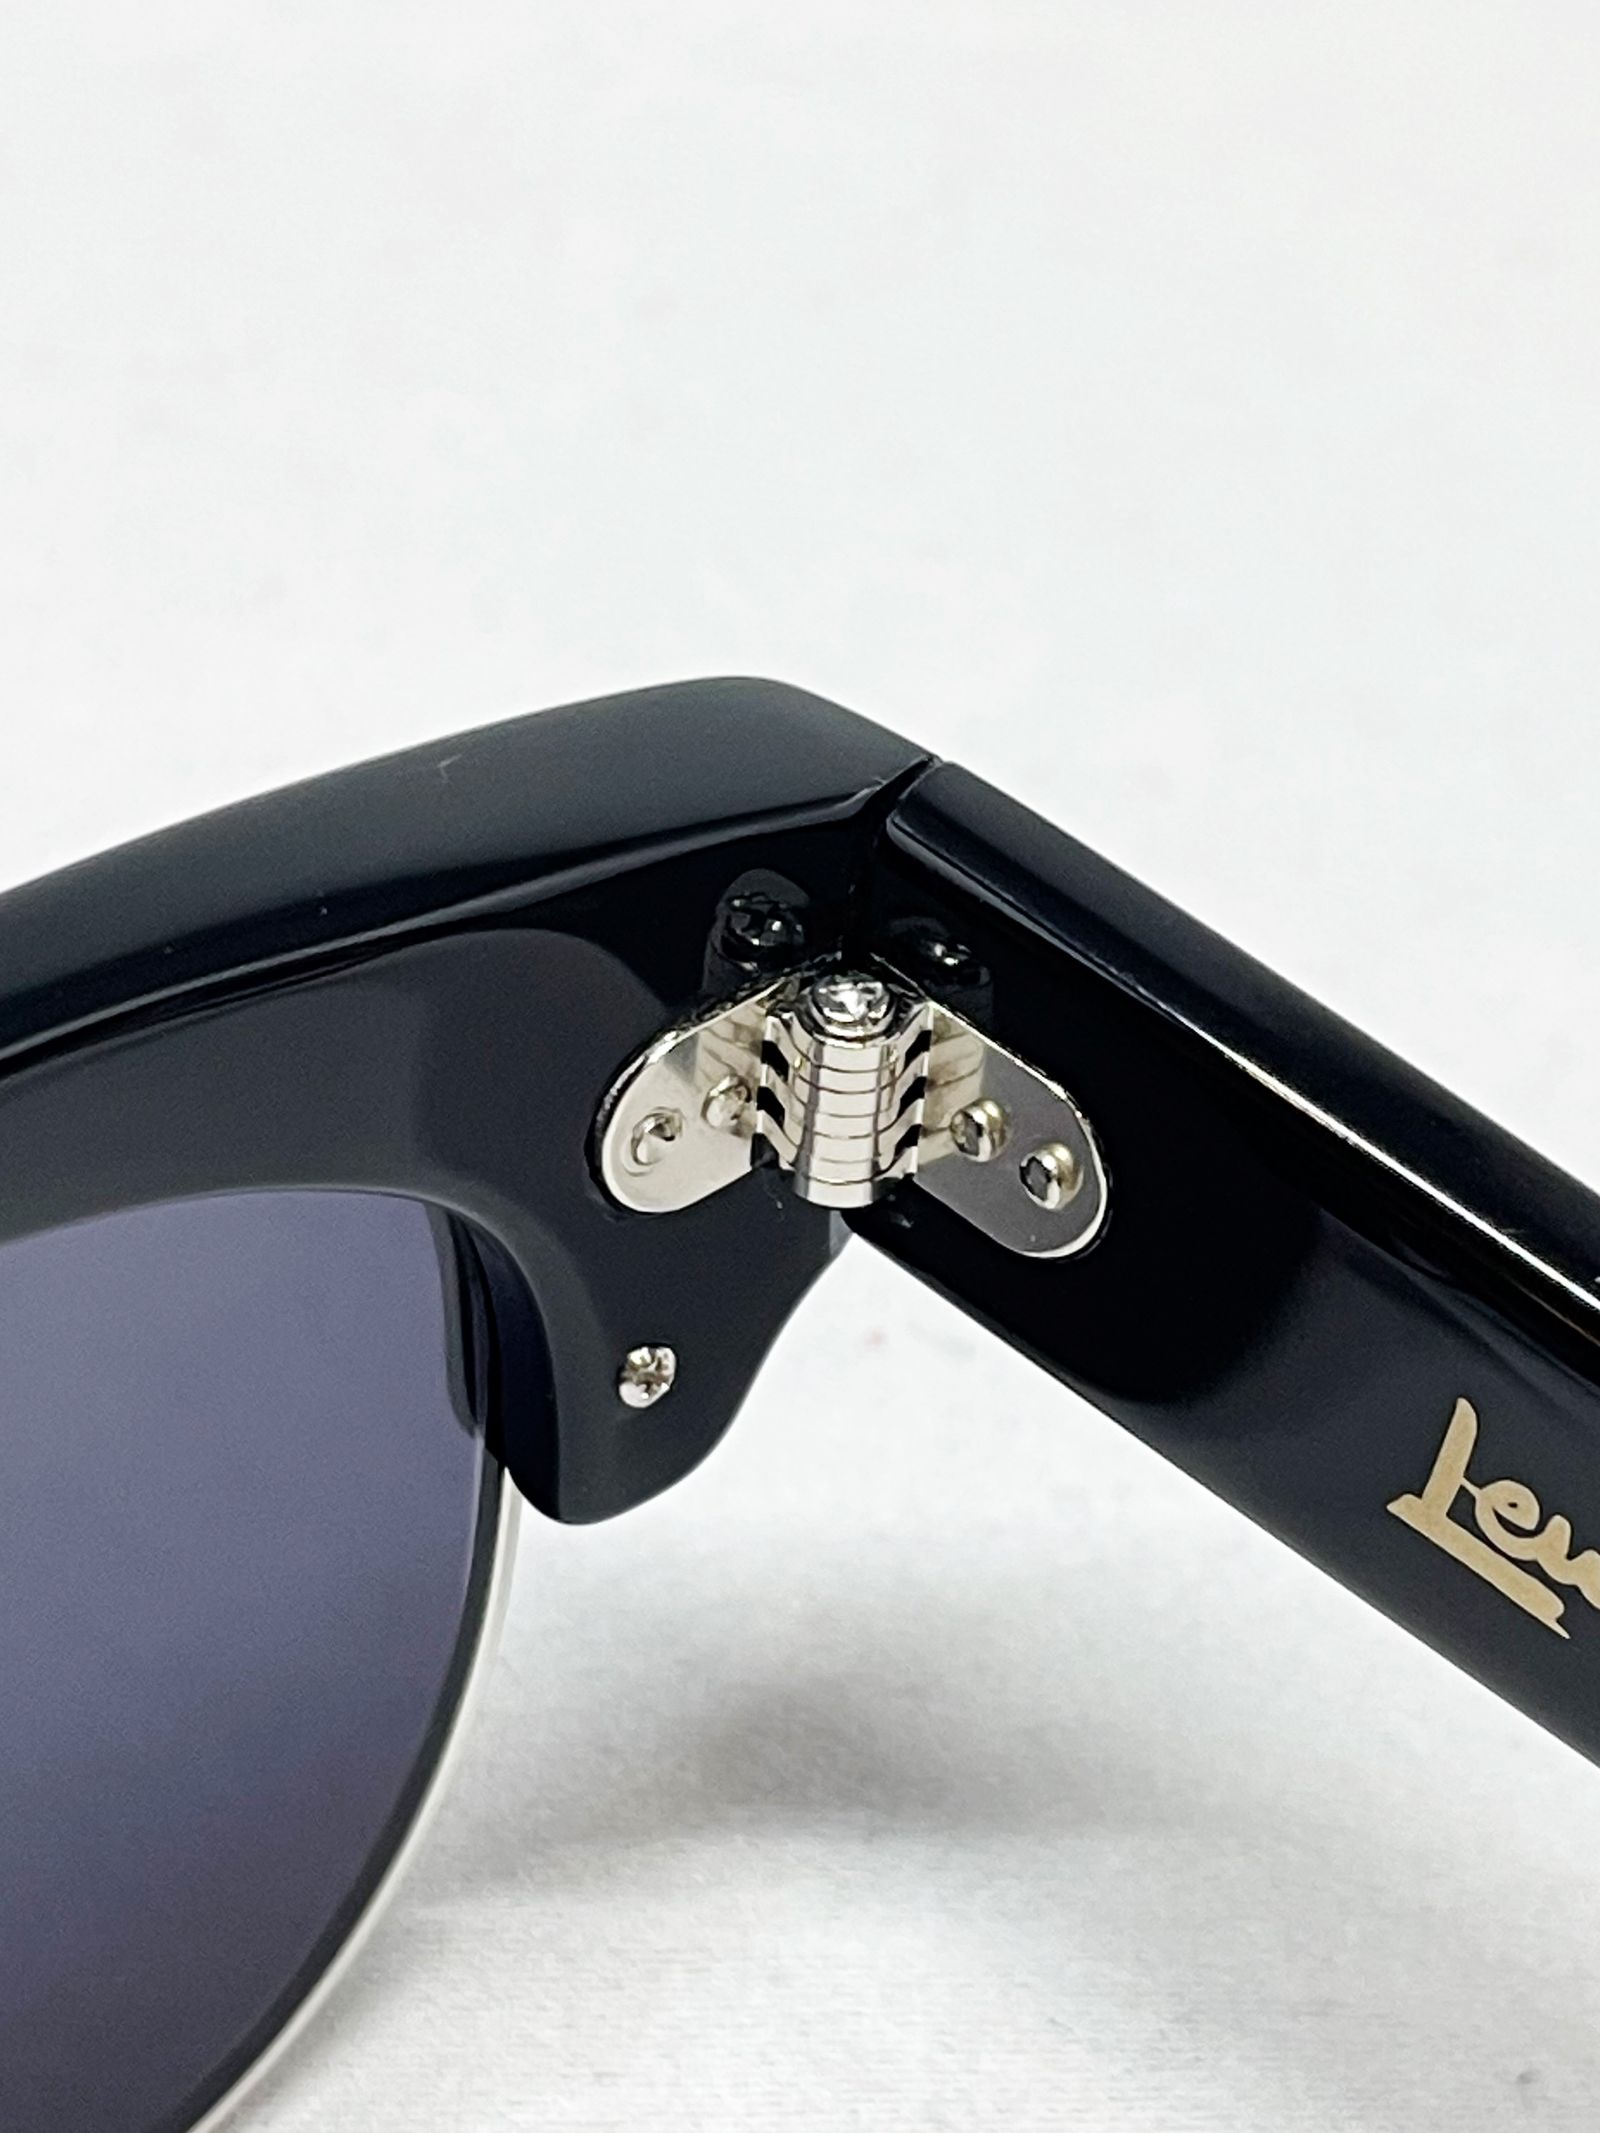 Lewis Leathers - 【即日発送可能】 EFFECTOR × Lewis Leathers